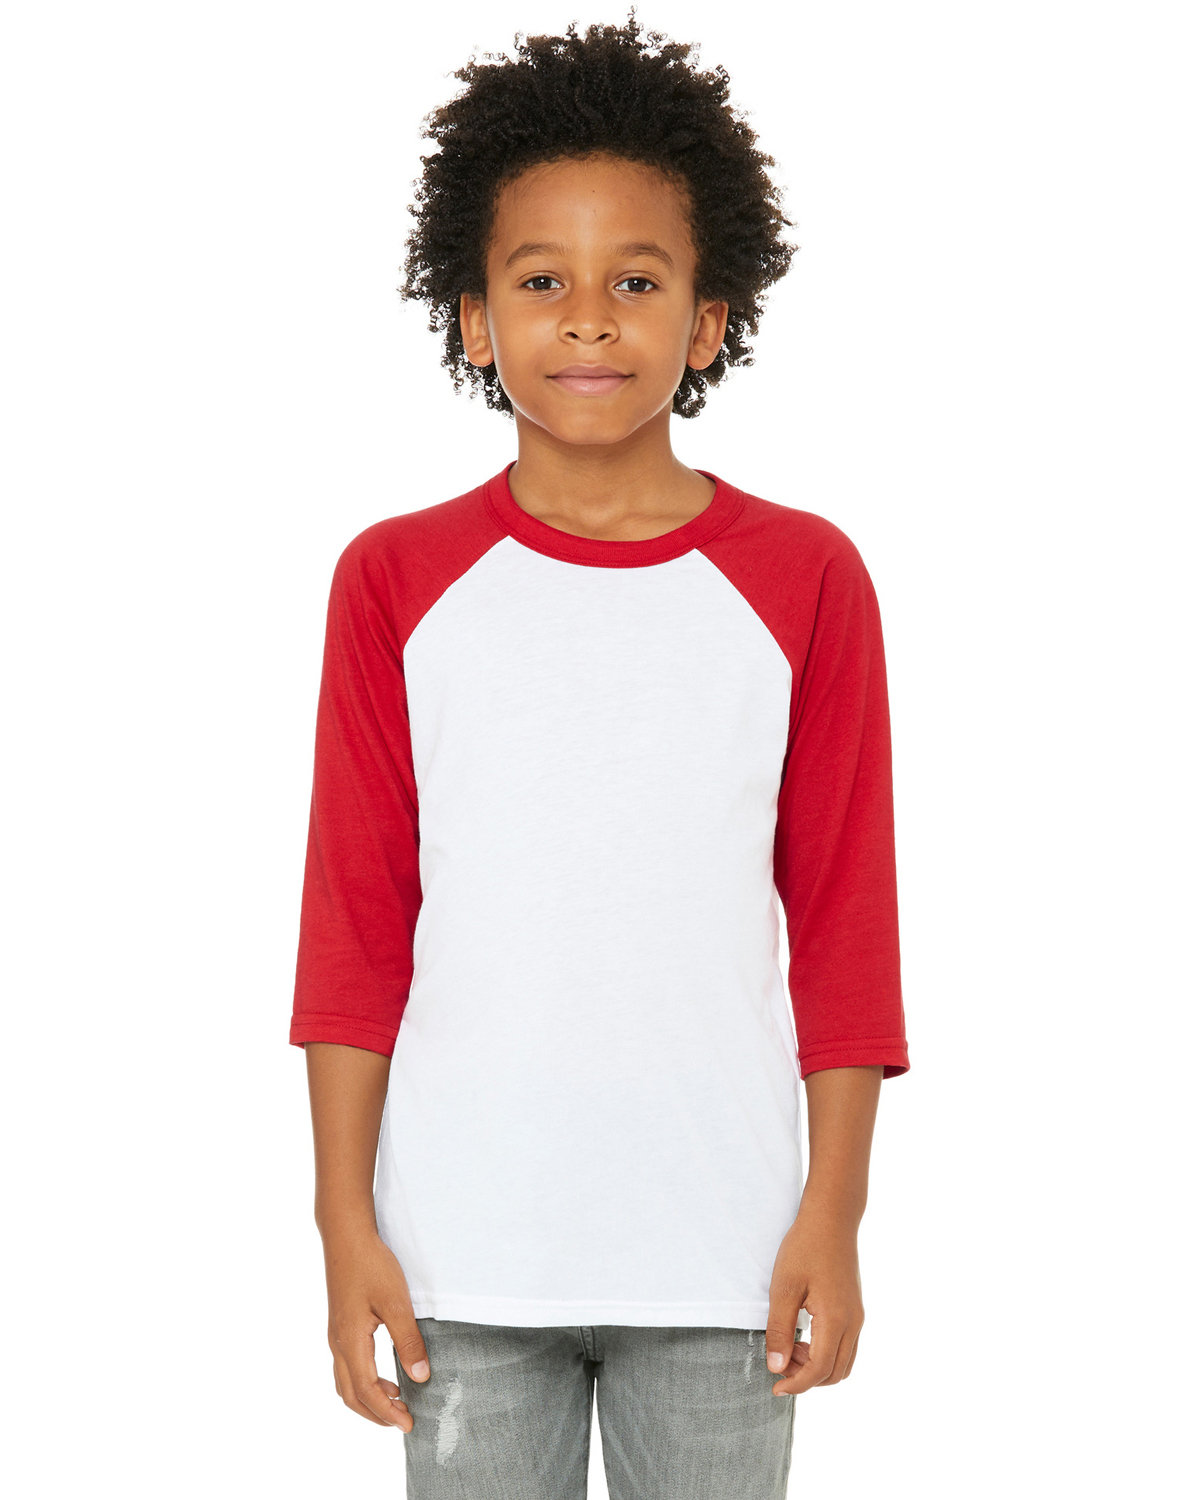 Bella + Canvas Youth 3/4-Sleeve Baseball T-Shirt WHITE/ RED 